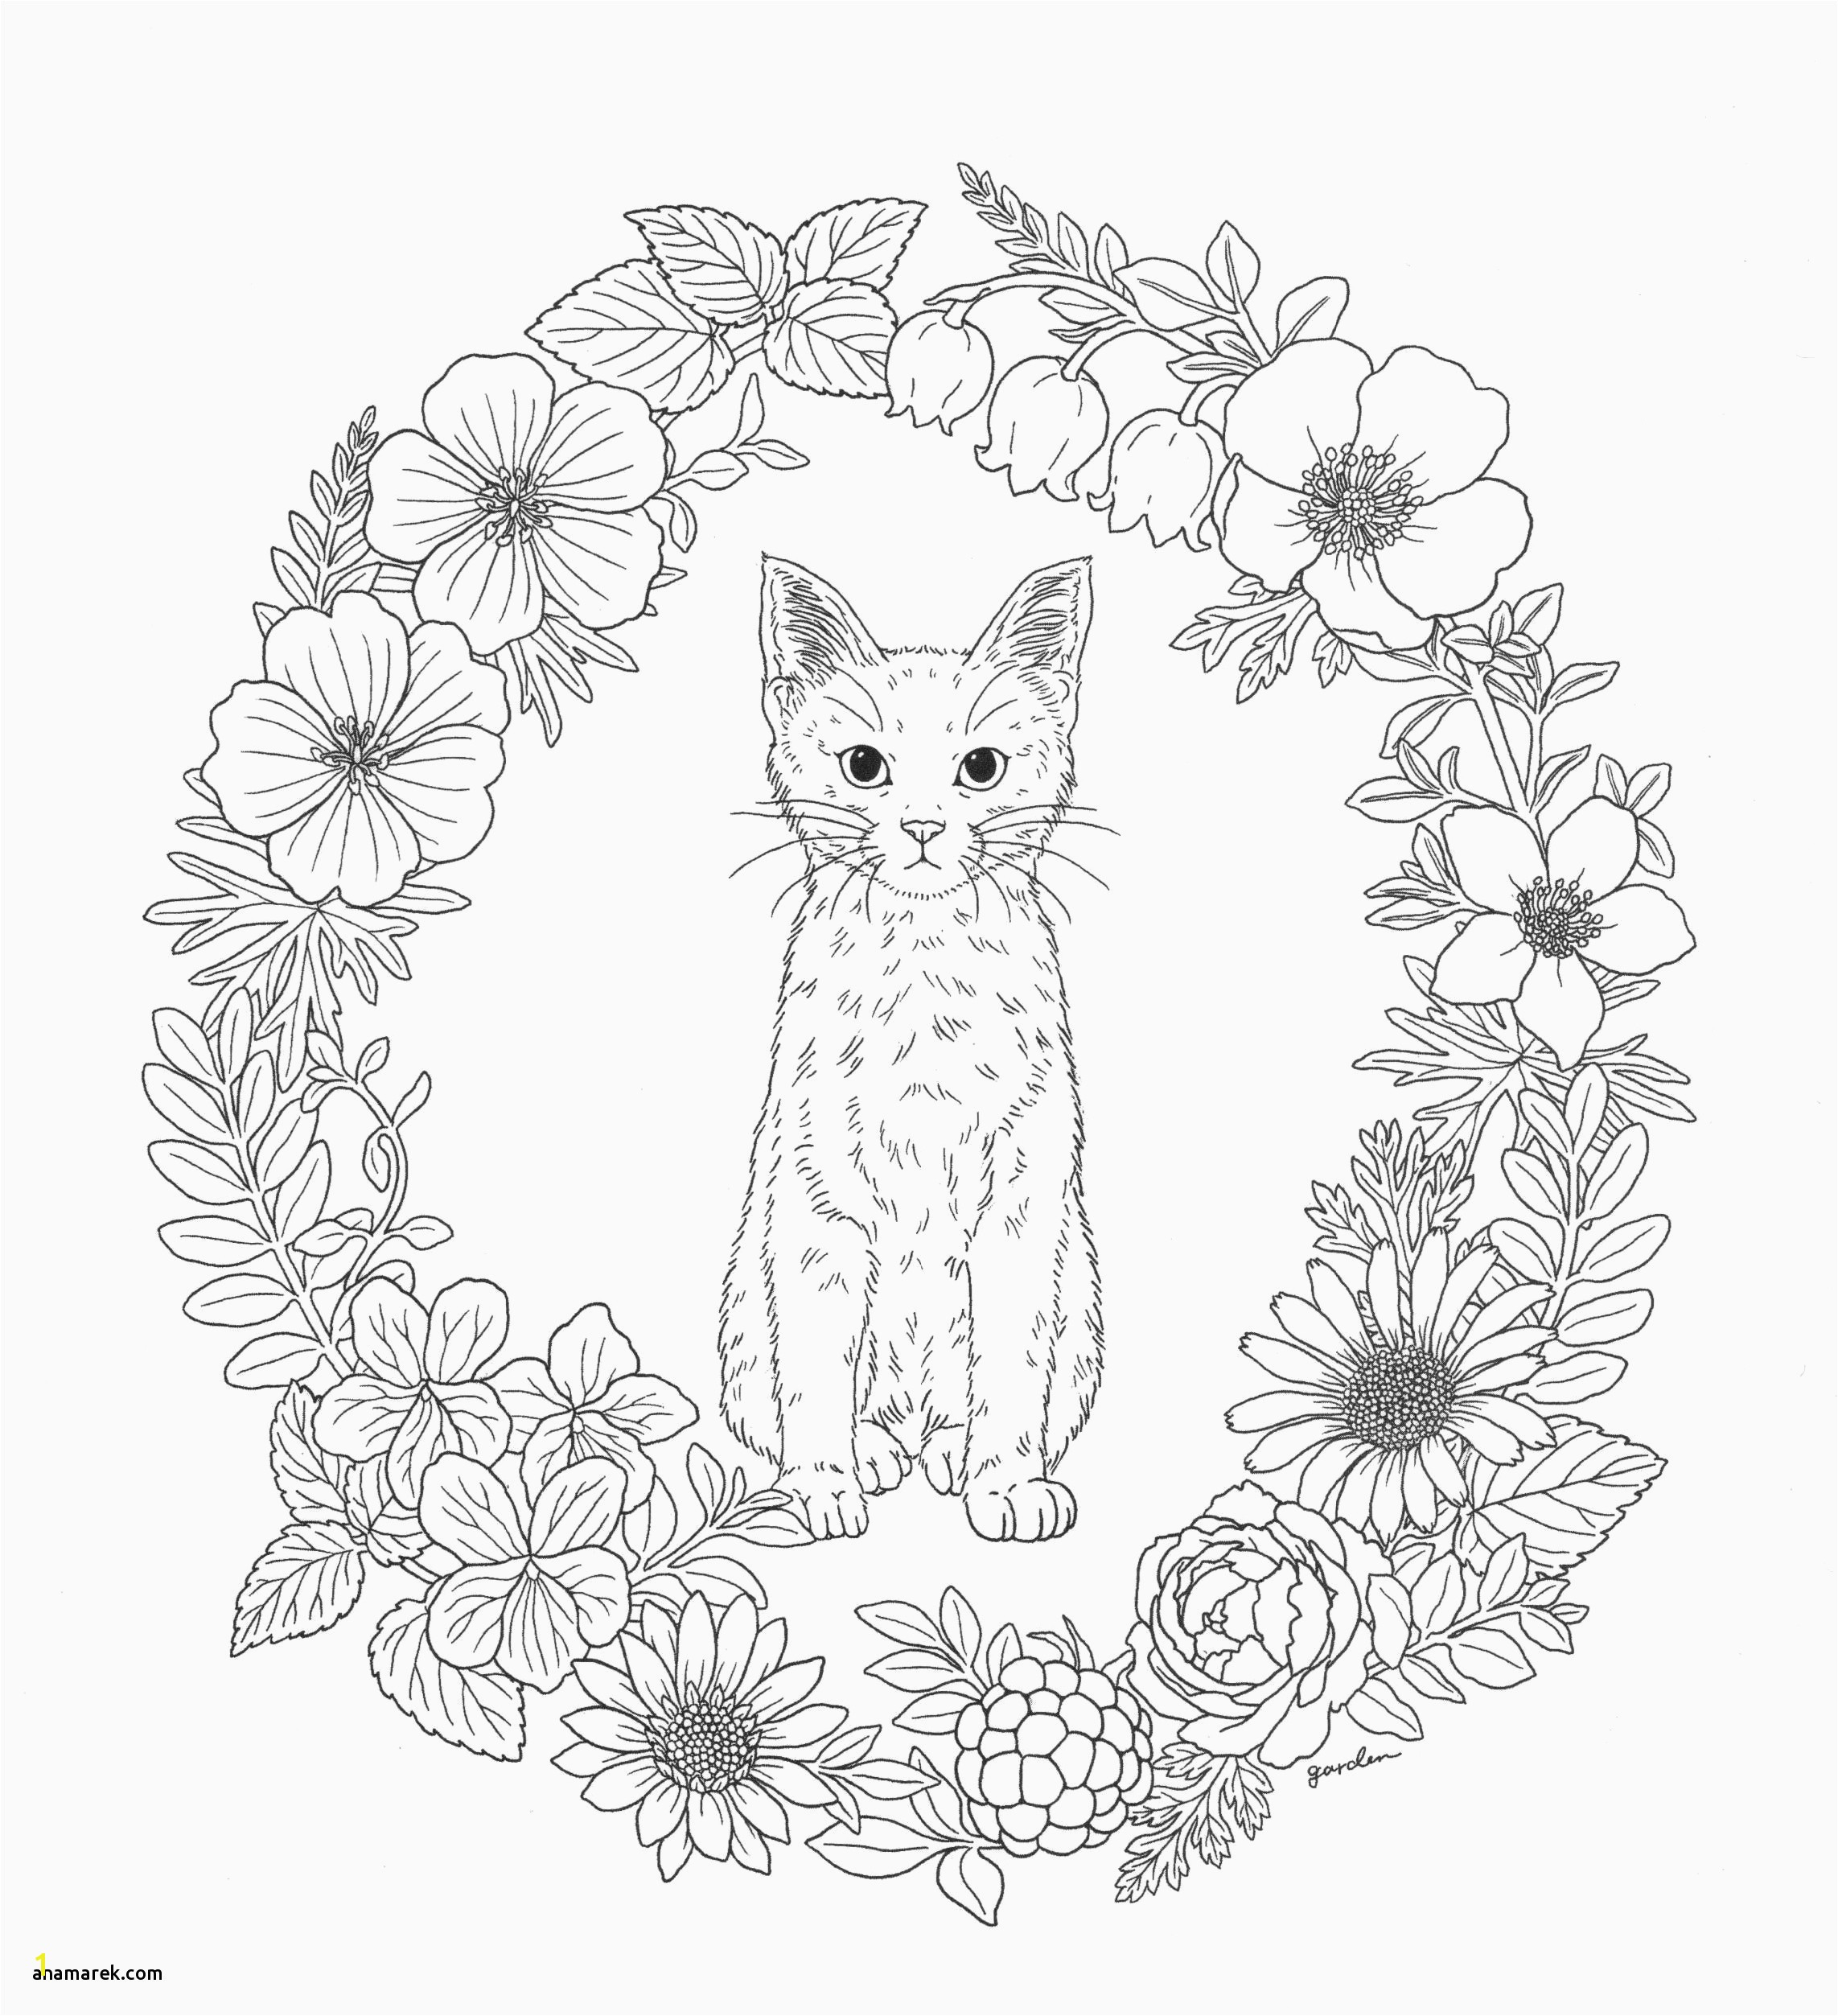 Coloring Pages Of Animals Hard Coloring Pages 55 Marvelous Coloring Pages Hard Animals Free